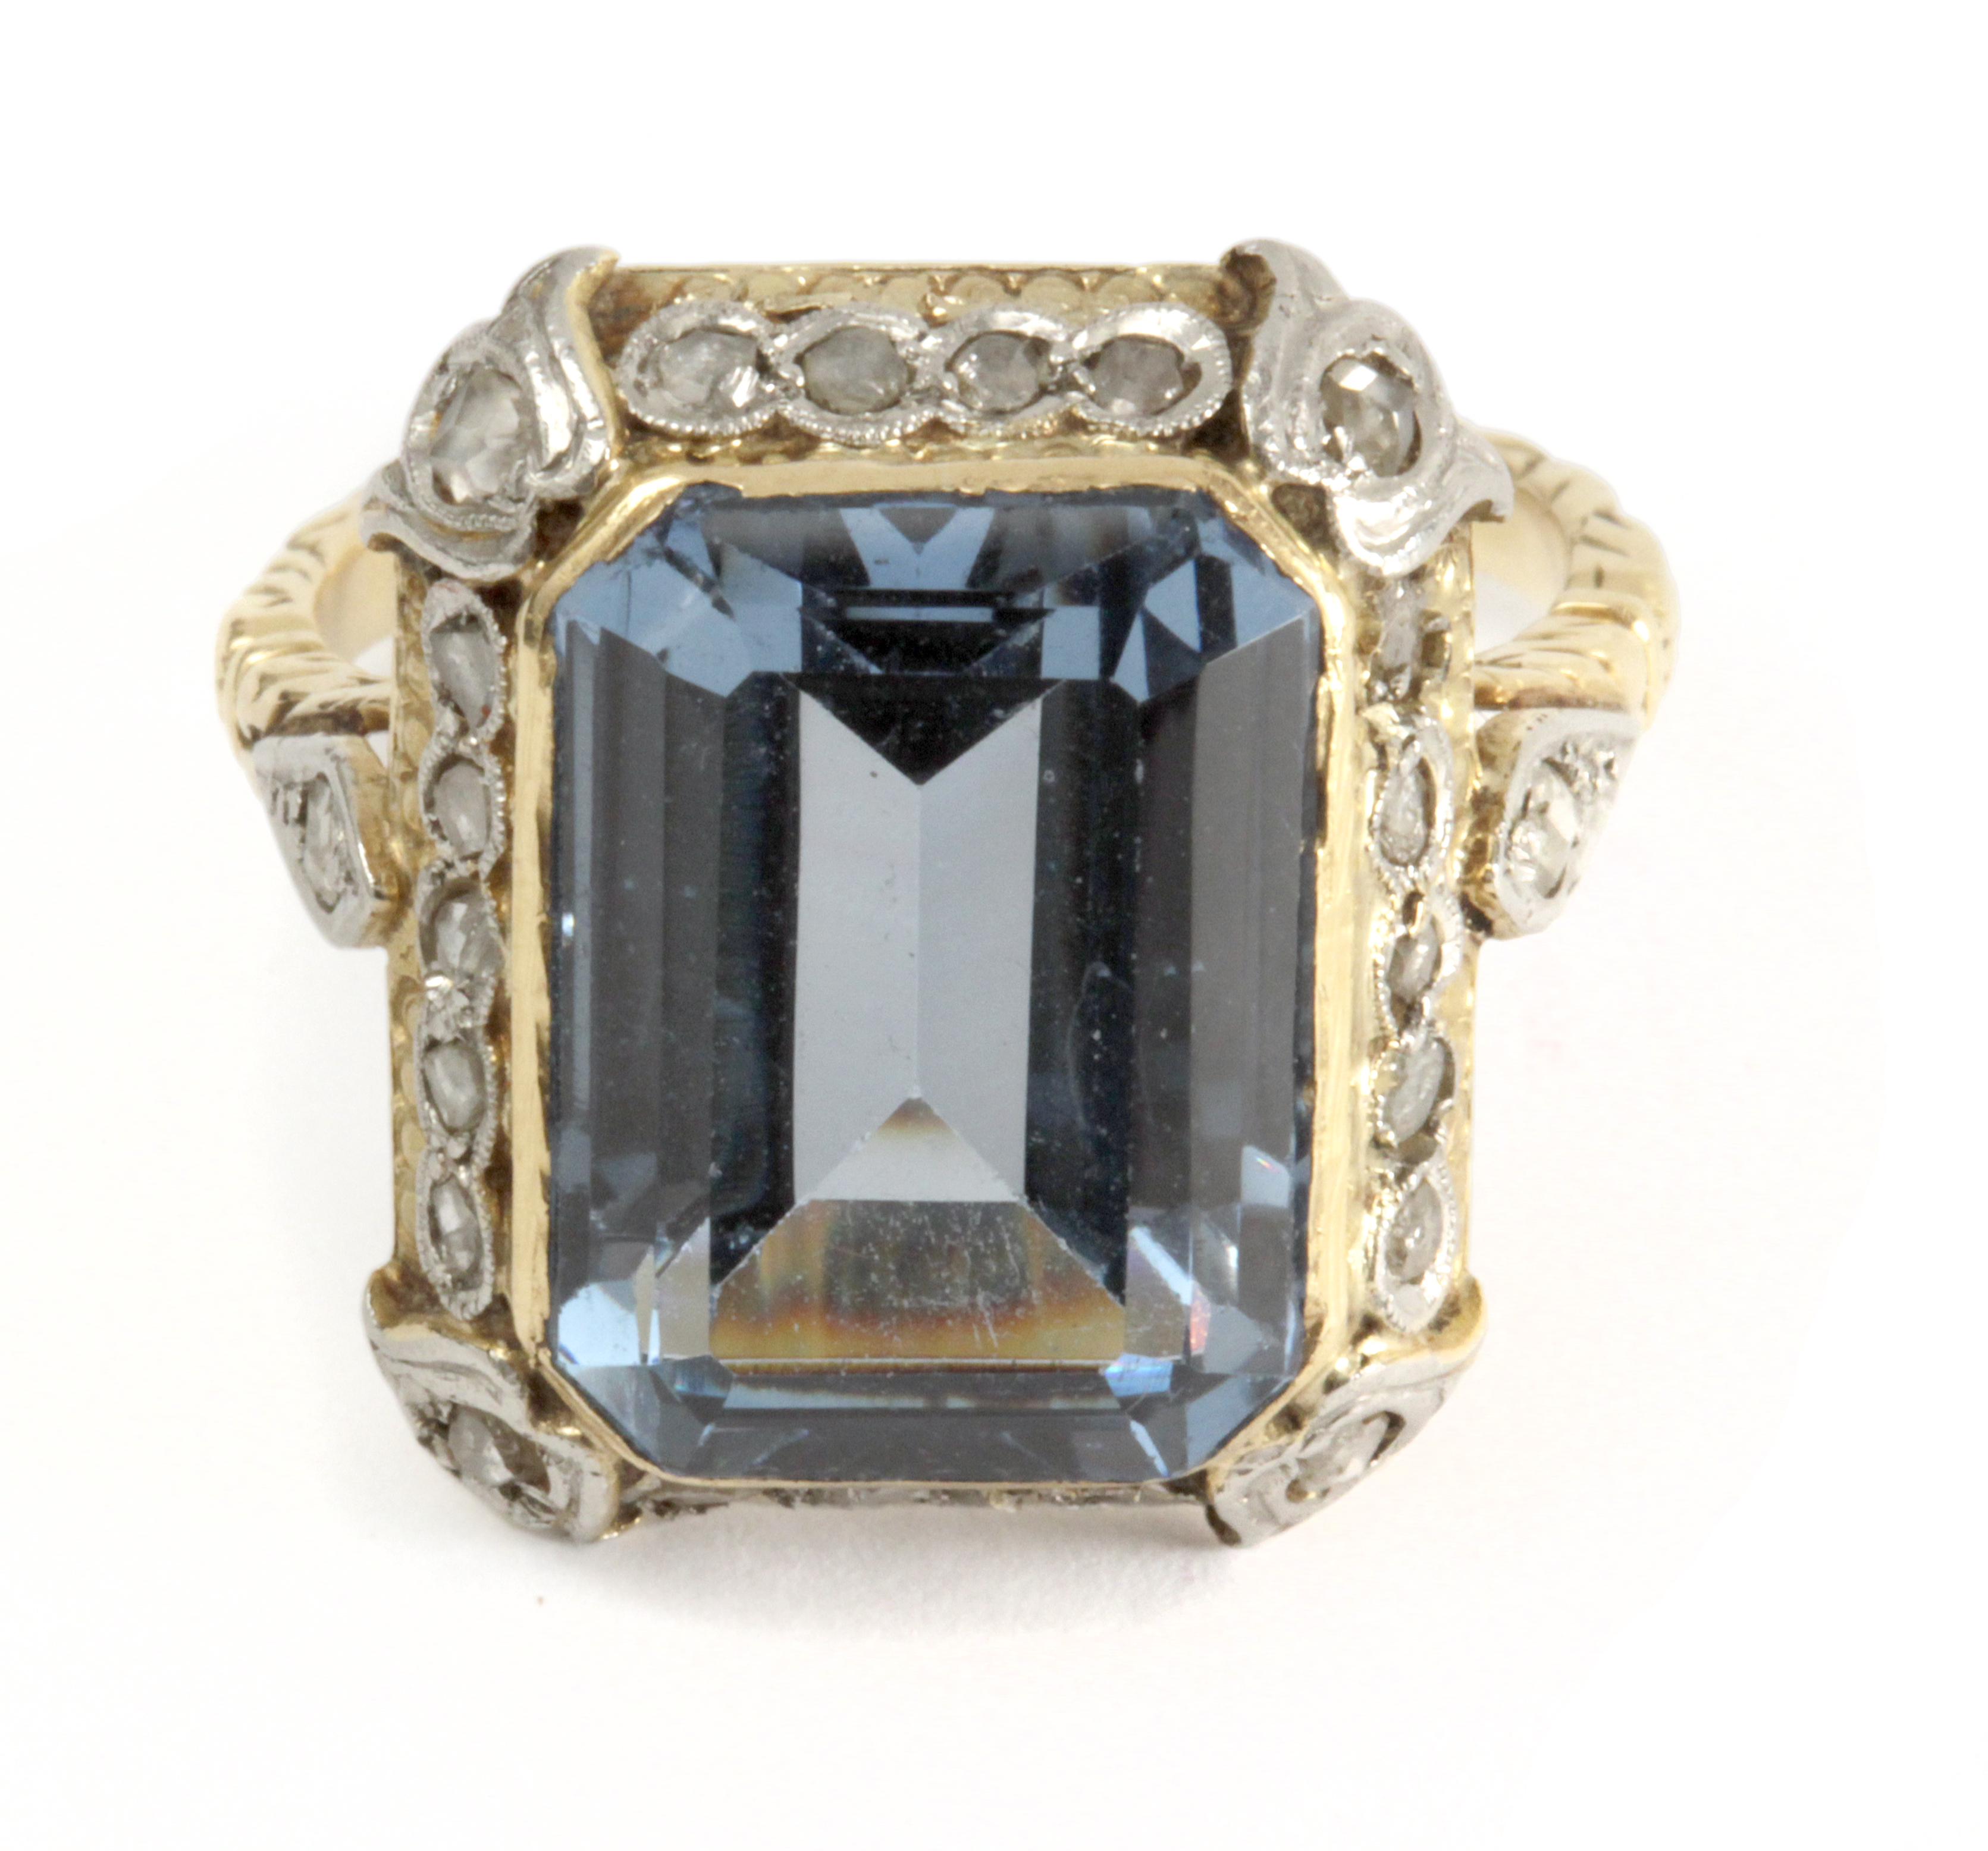 18k. yellow gold, platinum, synthetic spinel and rose cut diamonds ring circa 1940 - Image 2 of 3